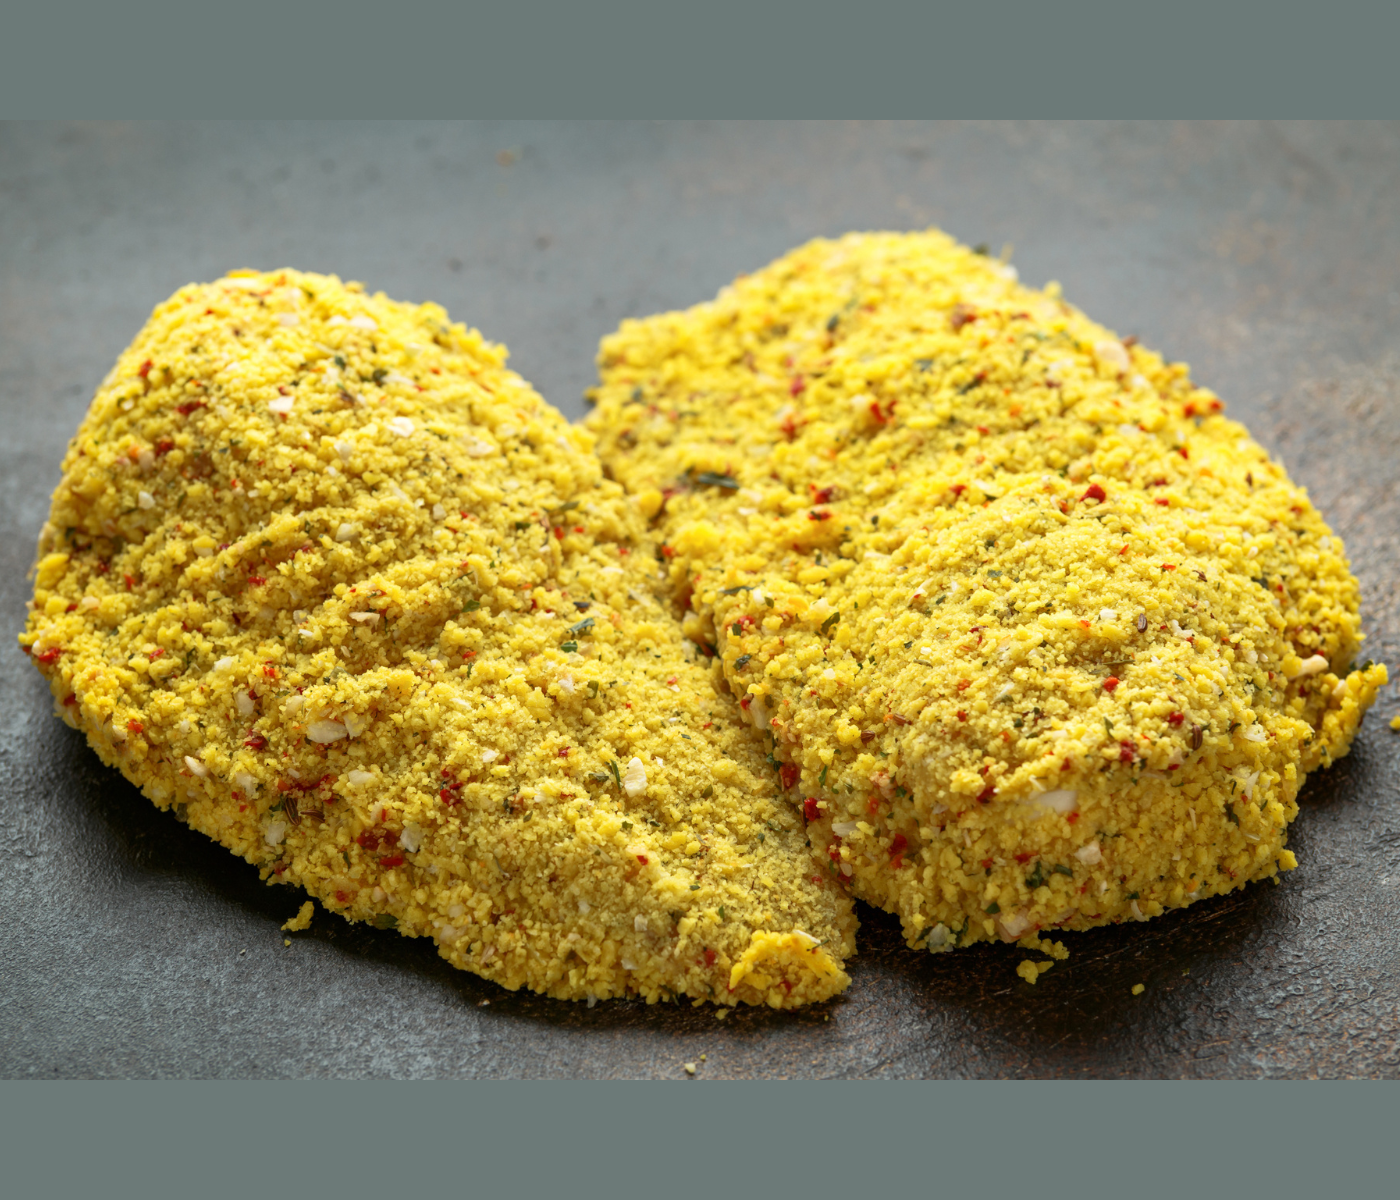 USDA will declare Salmonella an adulterant in breaded stuffed raw chicken products